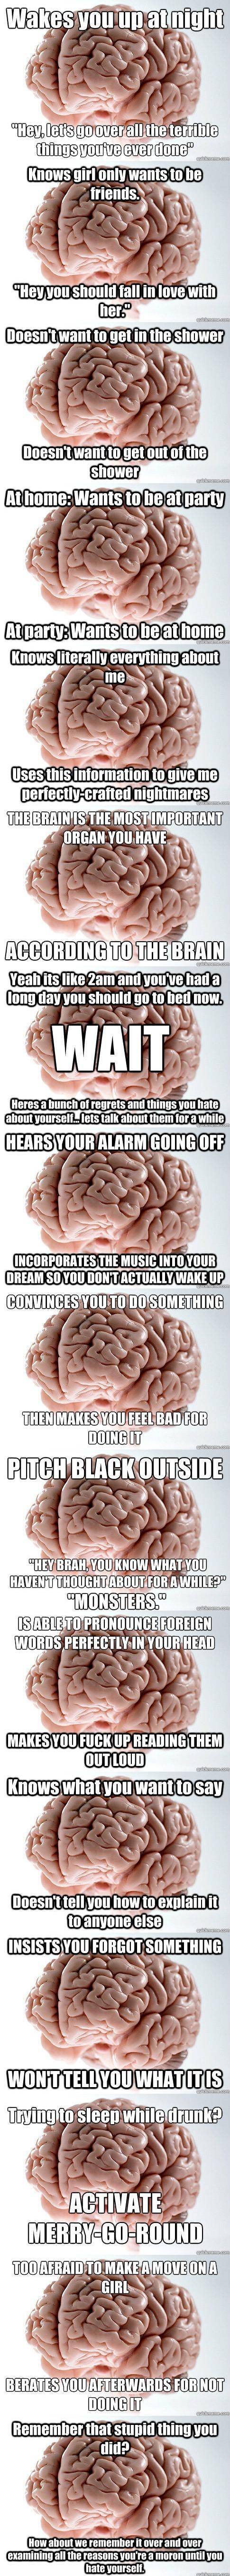 Face it, your brain hates you.